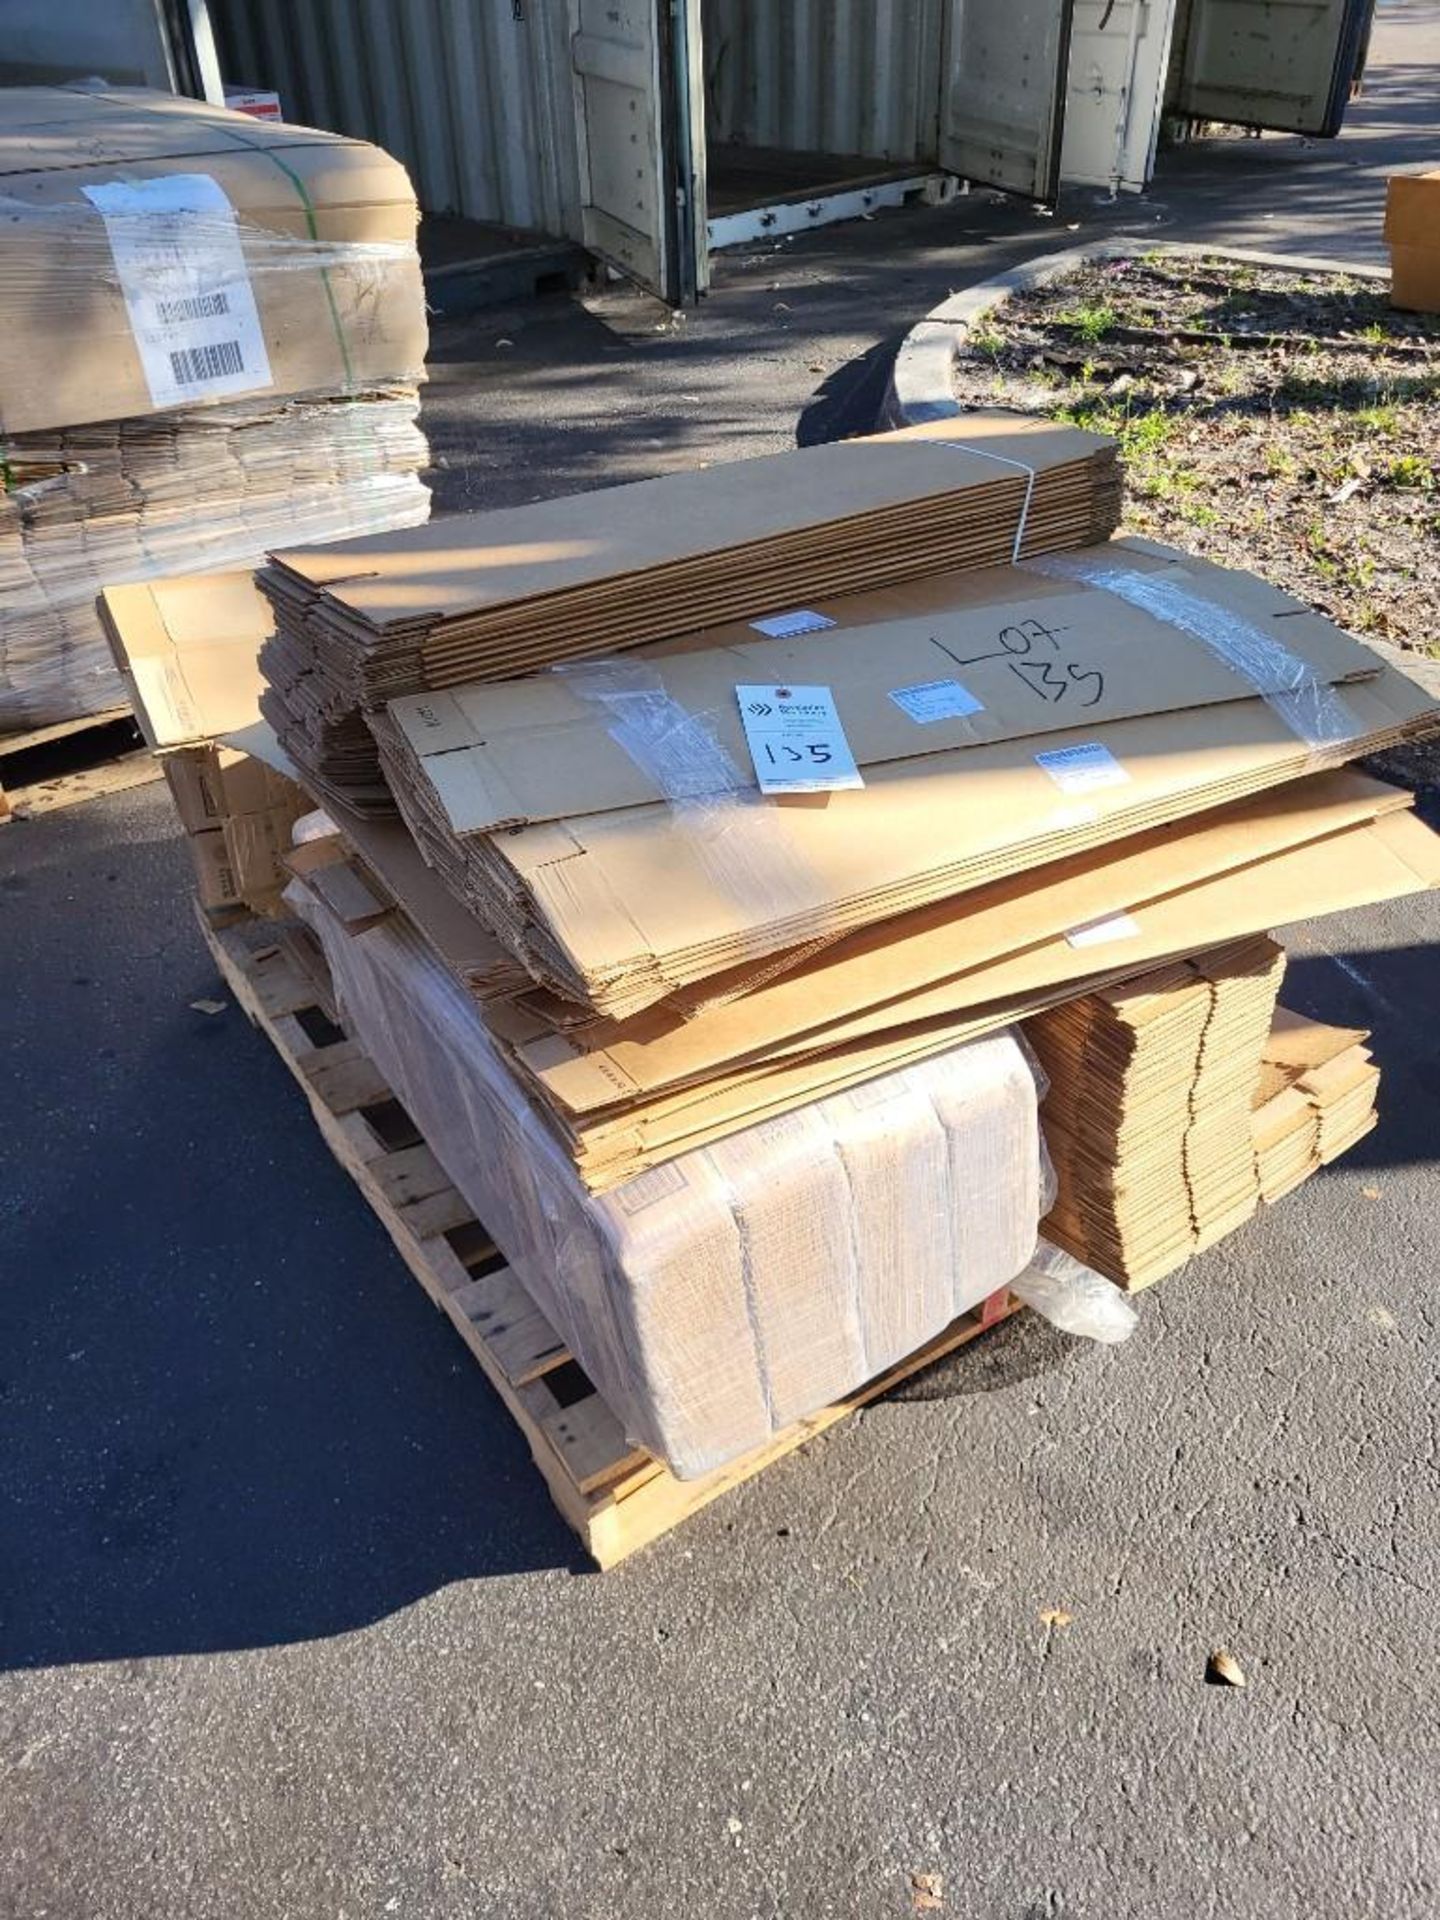 SHIPPING SUPPLIES - ASSORTED CARDBOARD BOXES